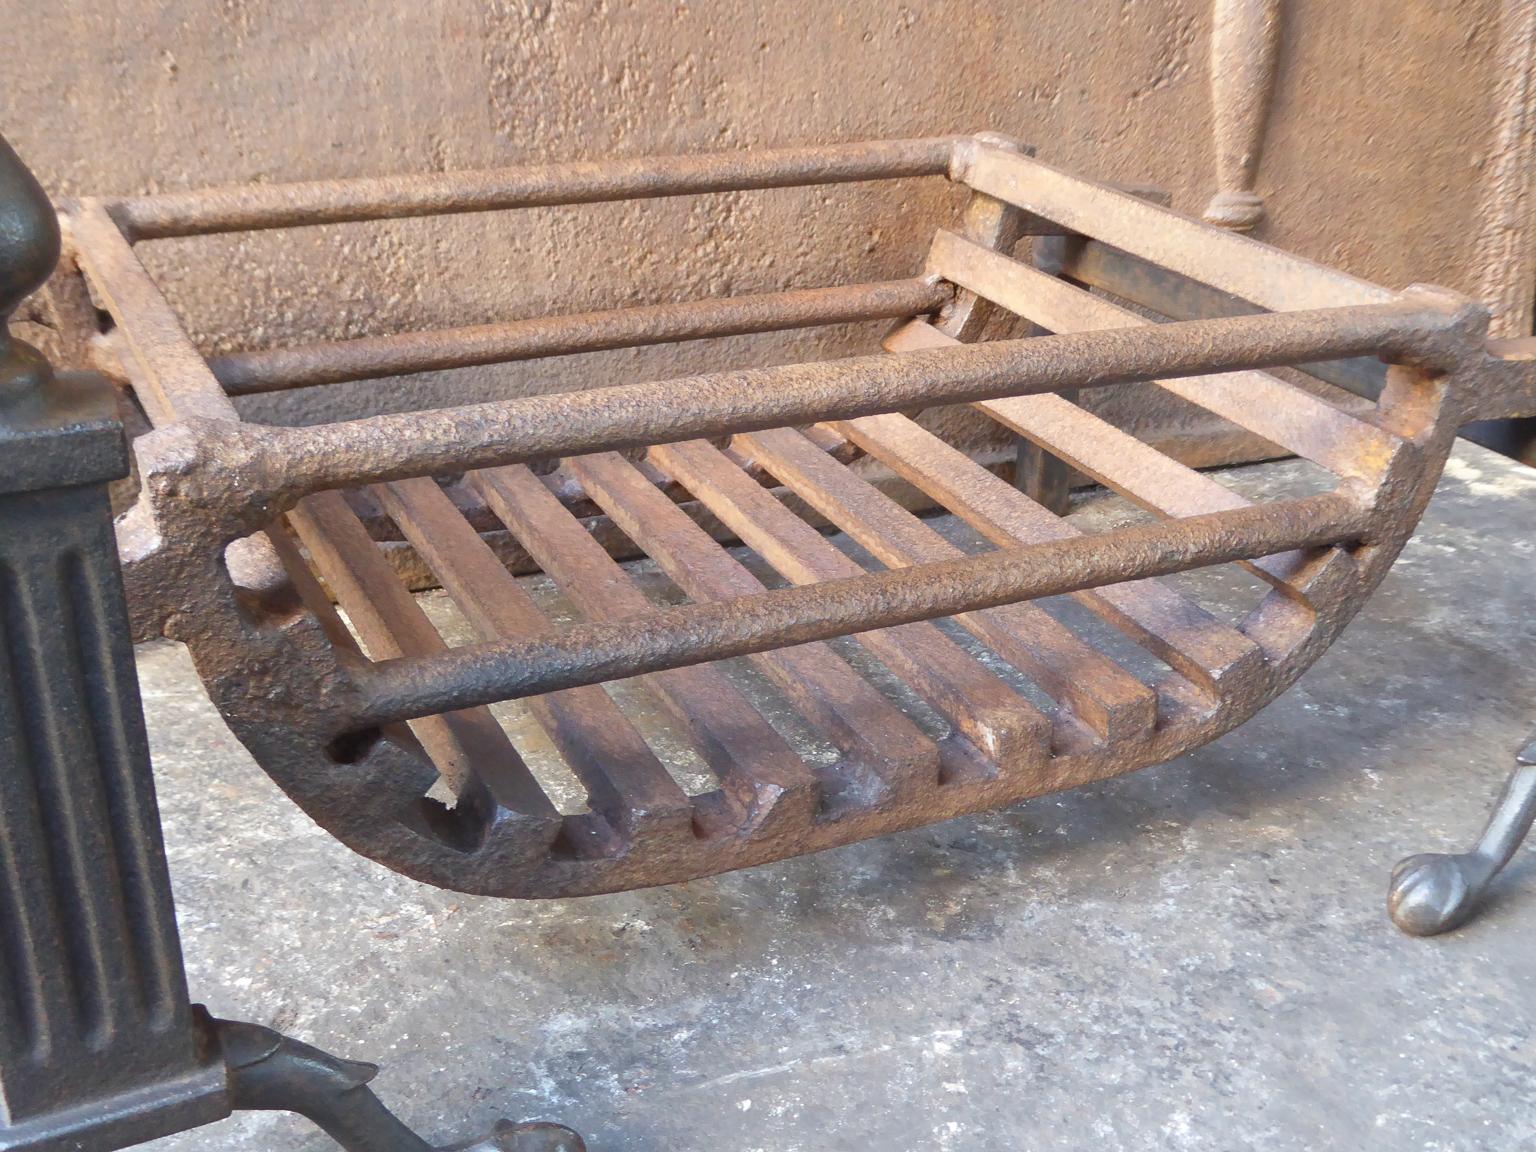 20th Century English Victorian Style Fireplace Grate, Fire Grate